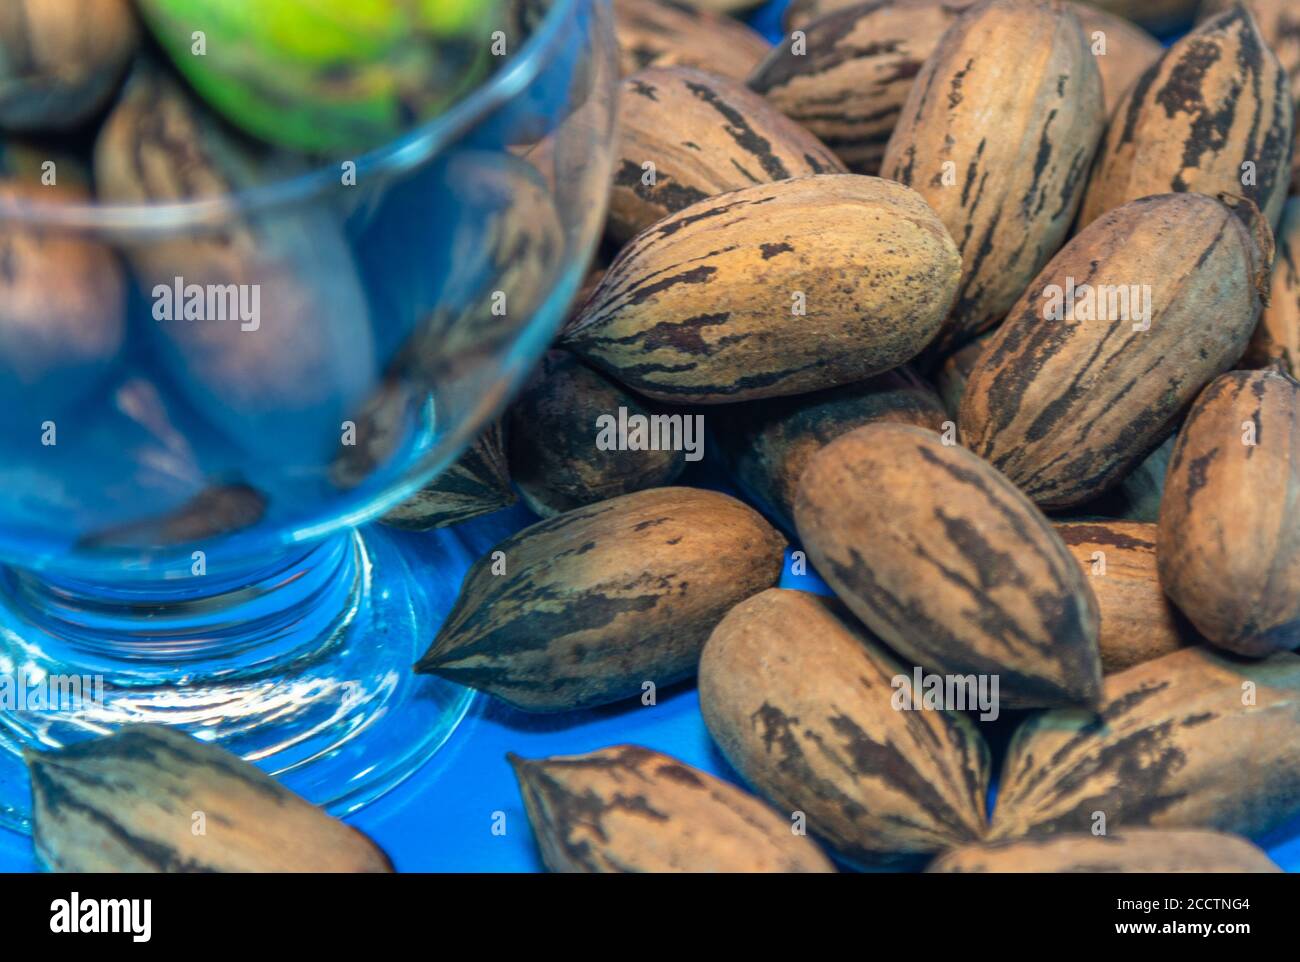 Pecan fruits (Carya illinoensis). American nuts. Pecan nuts, in particular, are an even more nutritious type than ordinary nuts, highlighting the aid Stock Photo